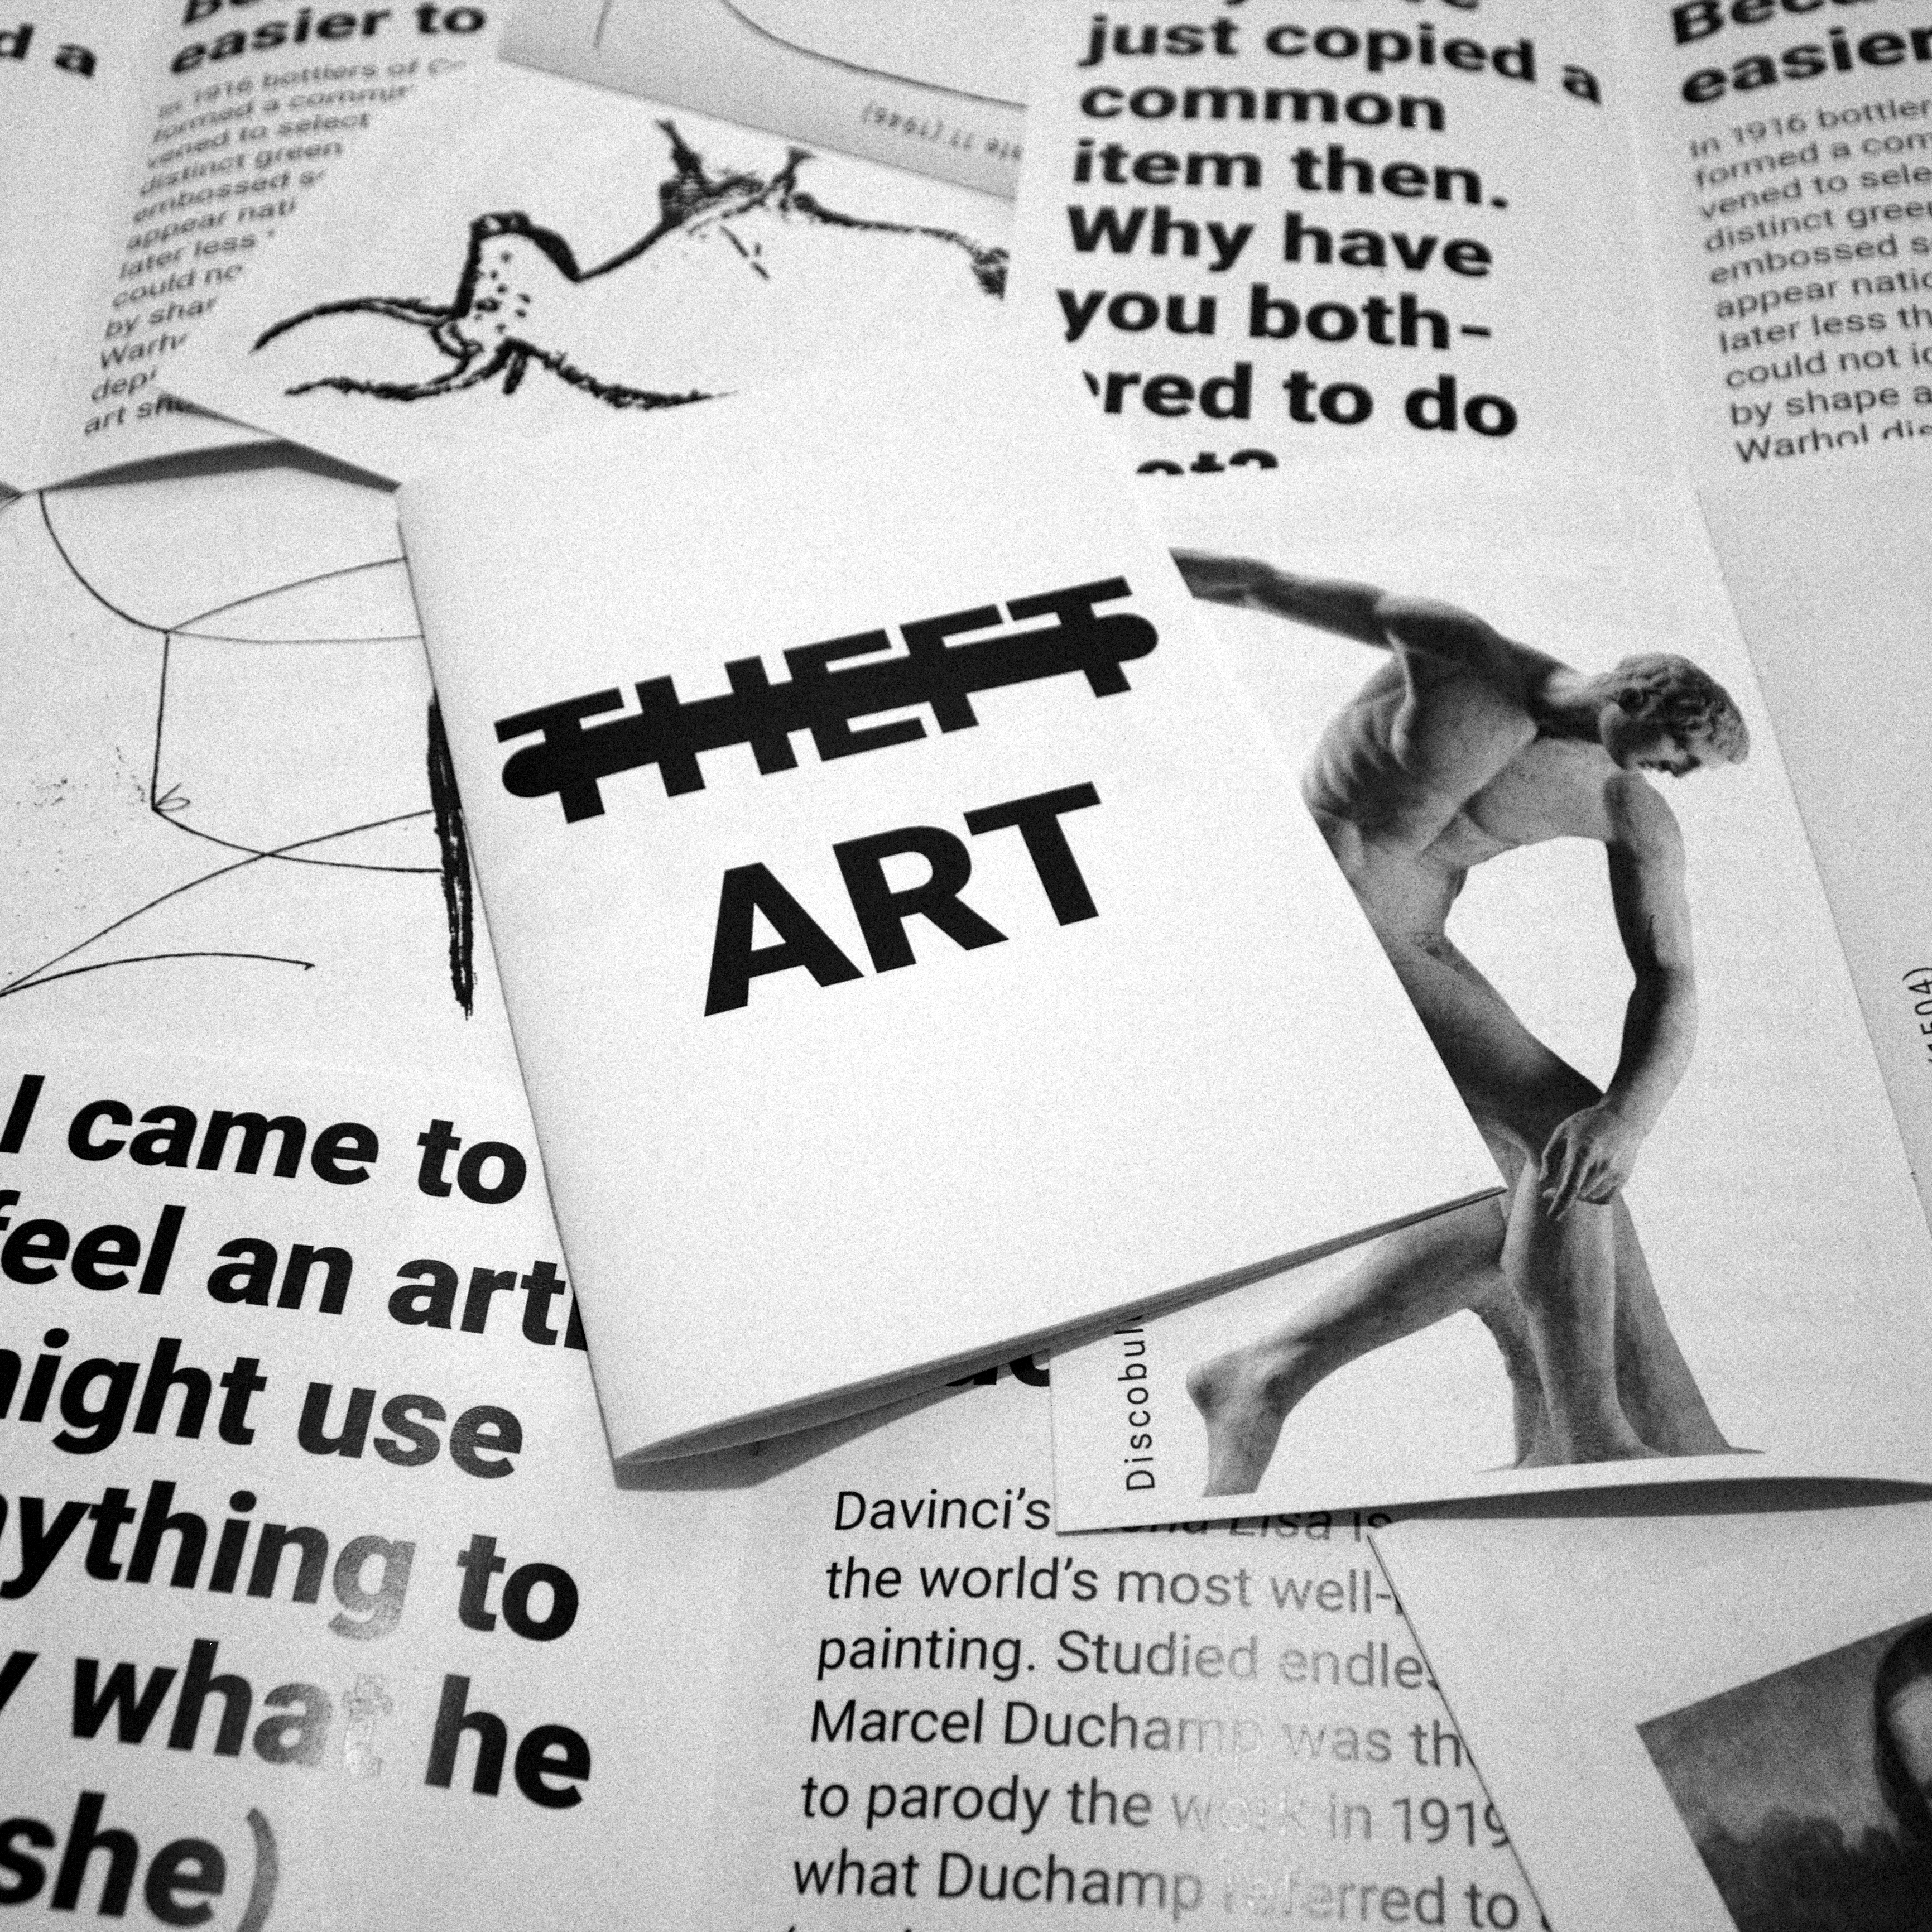 Theft/Art – 24 Page 8.5 x 5.5 in. Saddle-Stitched Booklet.